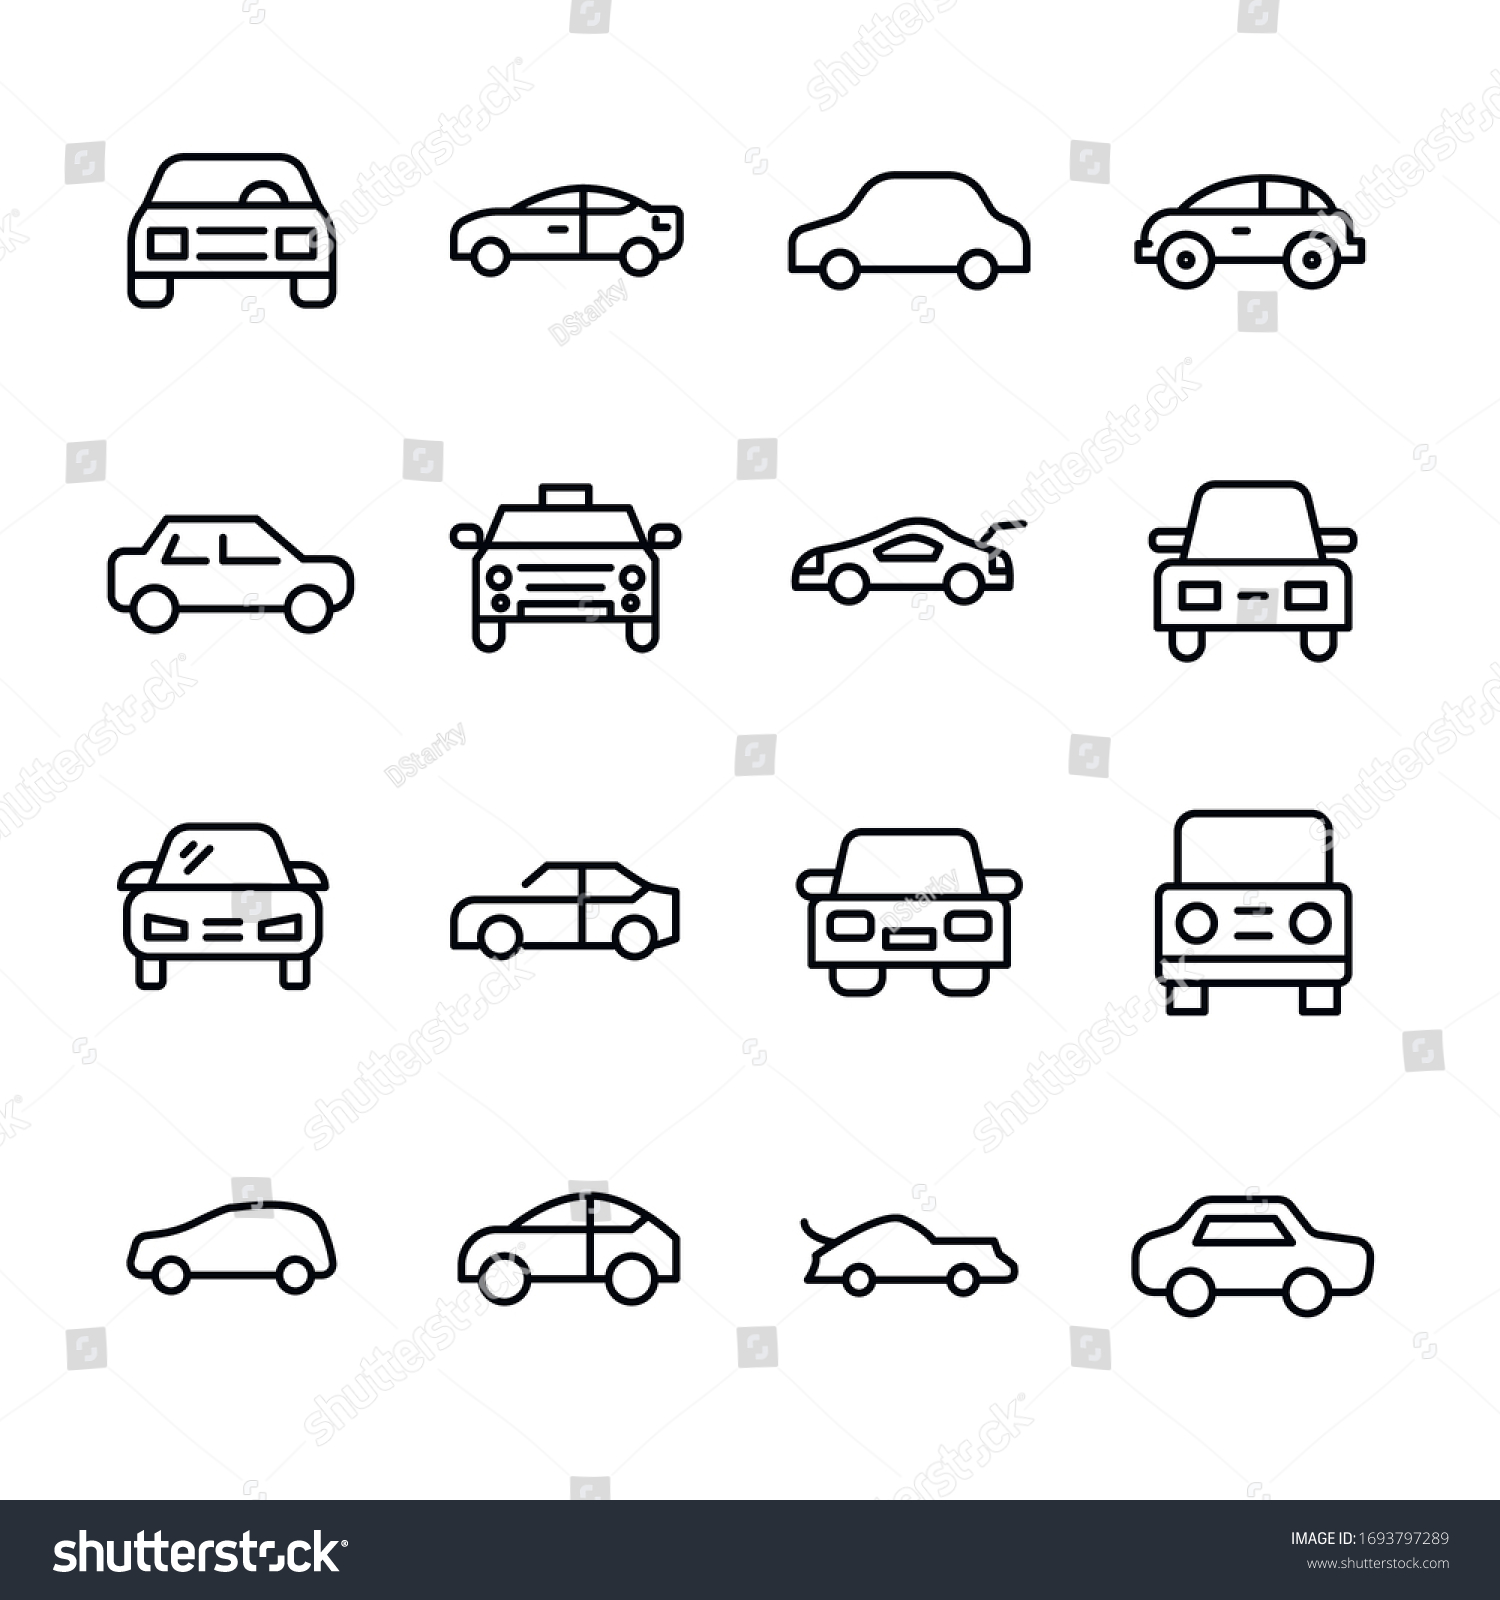 Icon set of car. Editable vector pictograms isolated on a white background. Trendy outline symbols for mobile apps and website design. Premium pack of icons in trendy line style. #1693797289